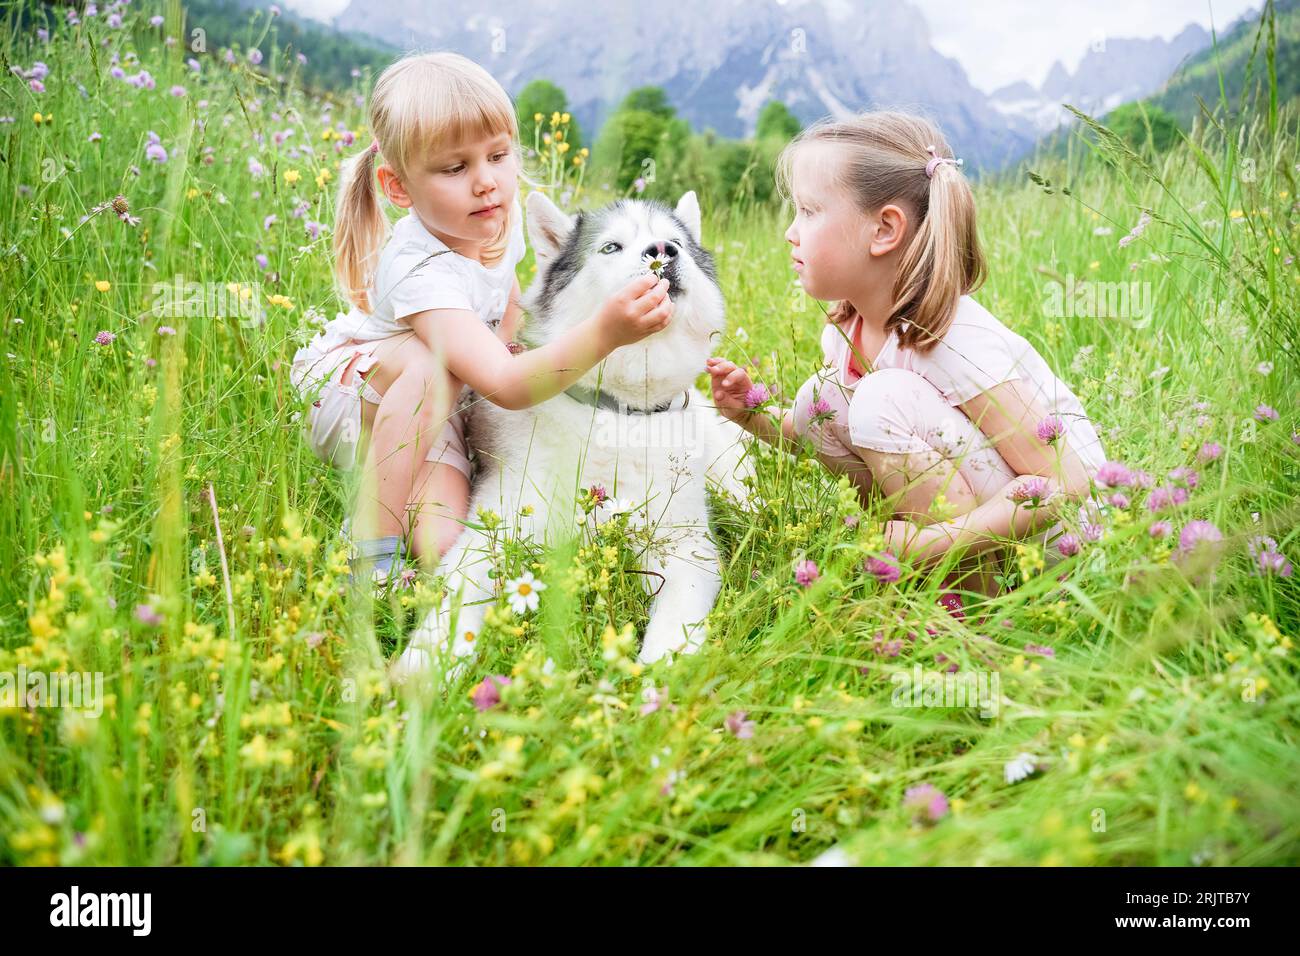 Girls spending leisure time with dog sitting on grass Stock Photo